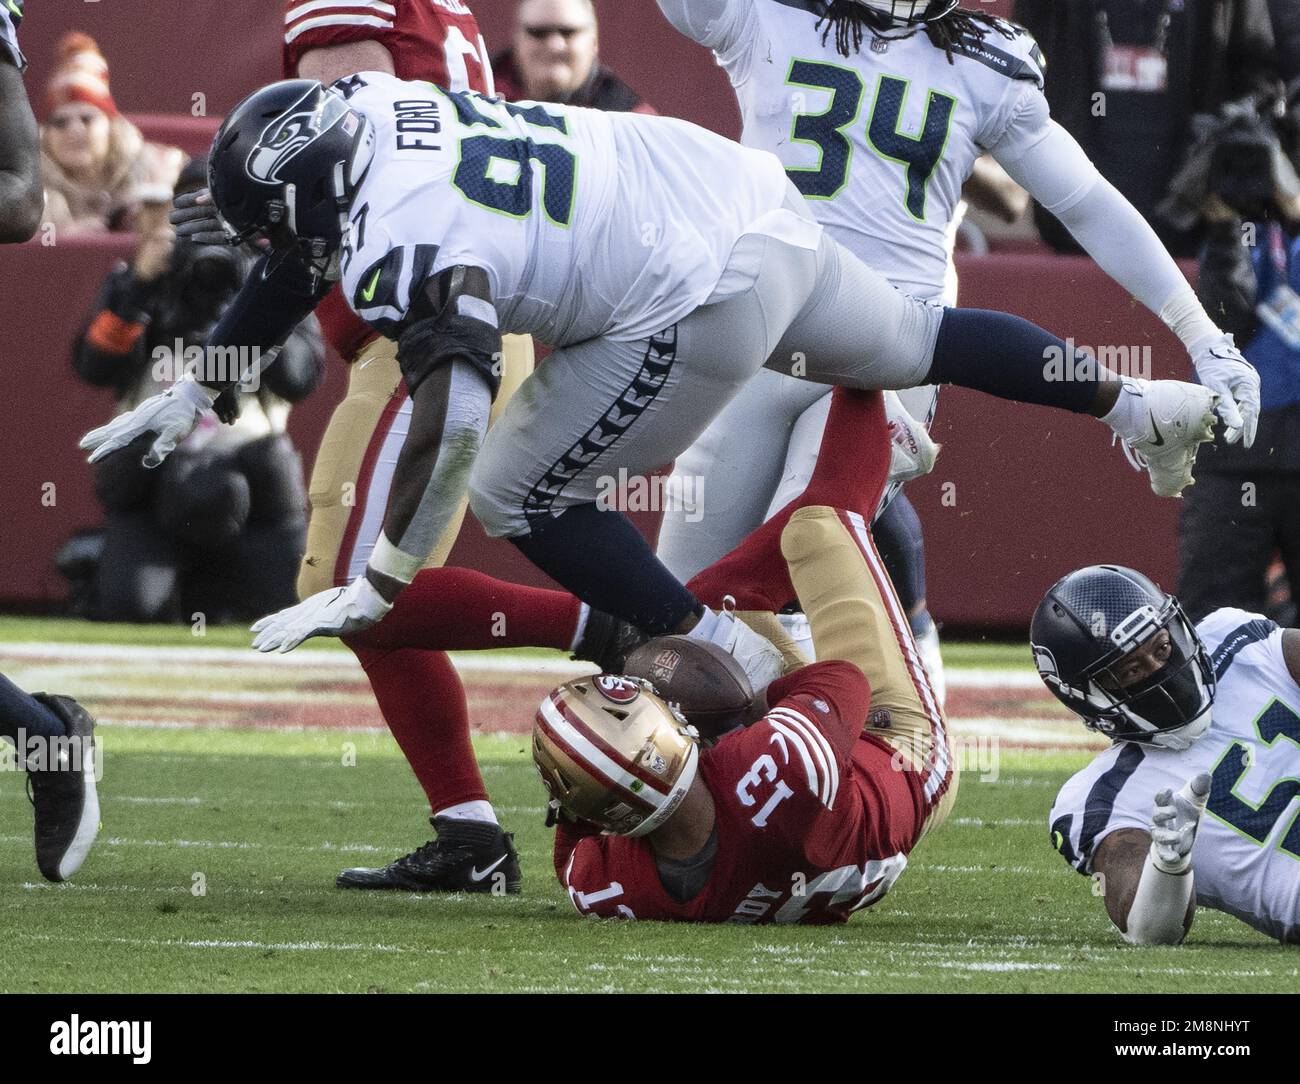 California, USA. 14th Jan, 2023. San Francisco 49ers quarterback Brock Purdy (13) gets stepped on by Seattle Seahawks defensive tackle Poona Ford (97) on a sack in the second quarter of the NFC Wildcard game at Levi's Stadium in Santa Clara, California on Saturday, January 14, 2023. The 49ers defeated the Seahawks 41-23. Photo by Terry Schmitt/UPI Credit: UPI/Alamy Live News Stock Photo